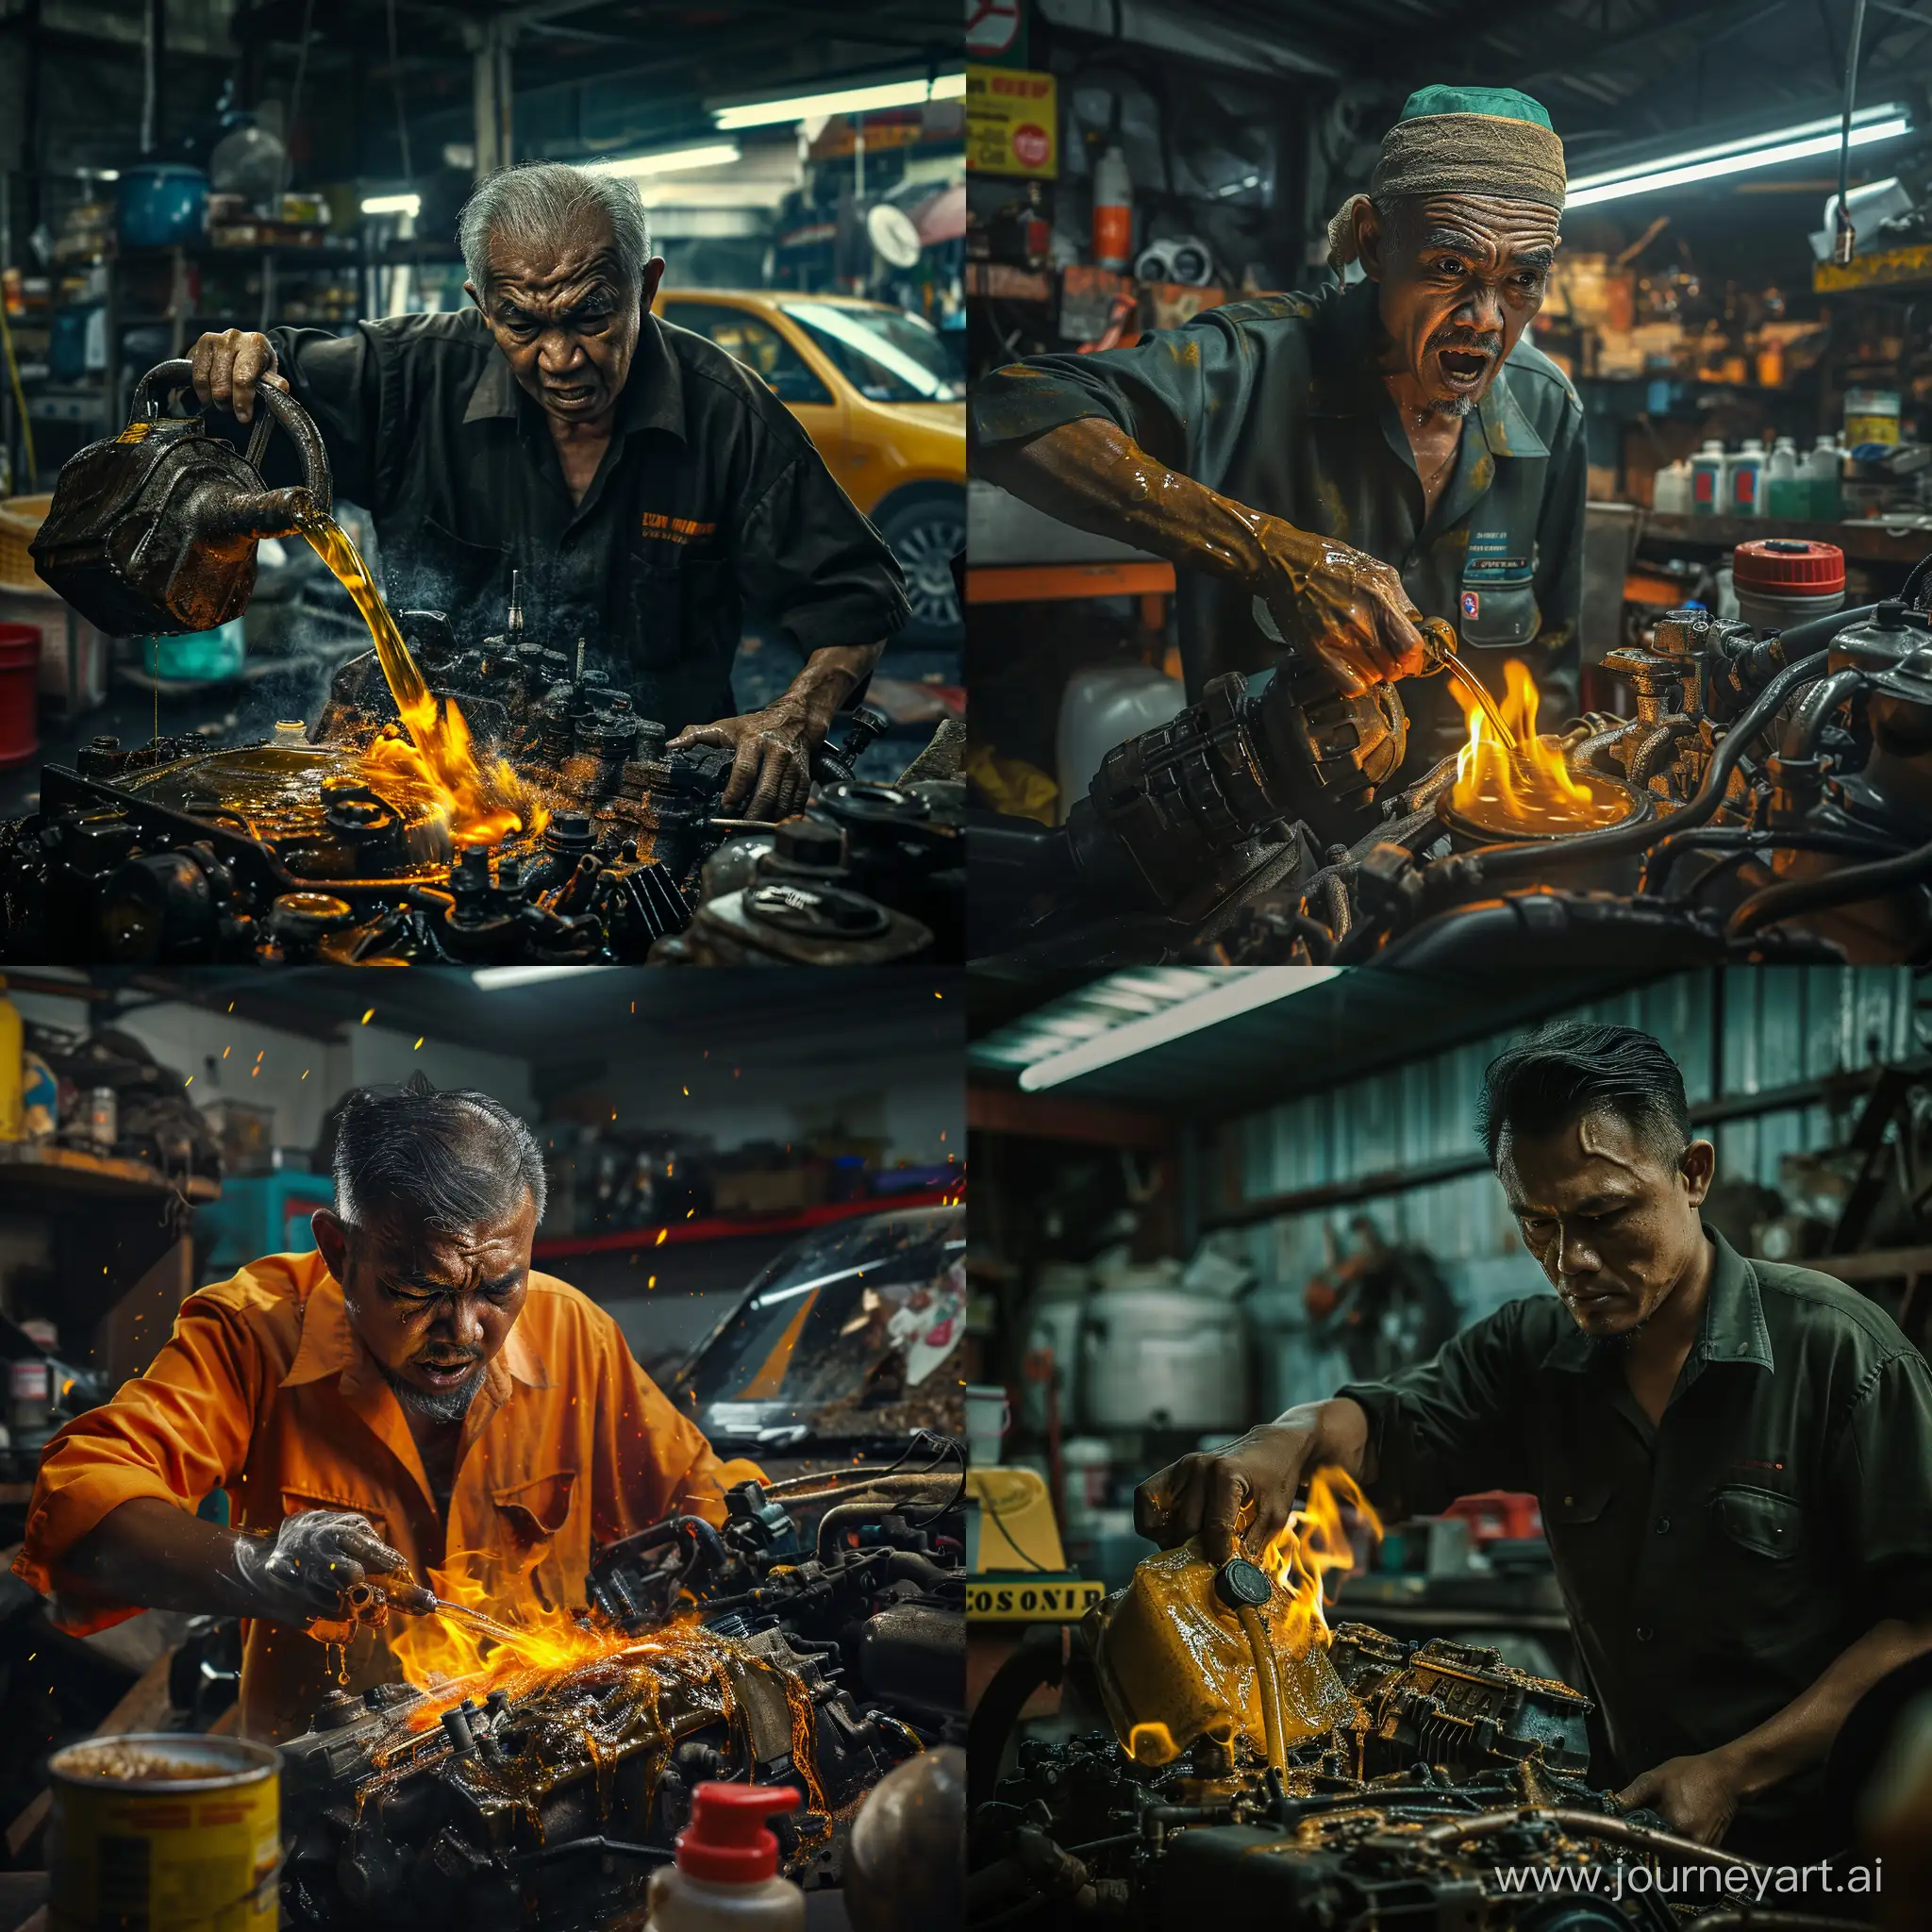 Furious-Malay-Mechanic-Addressing-Engine-Fire-in-StateoftheArt-Workshop